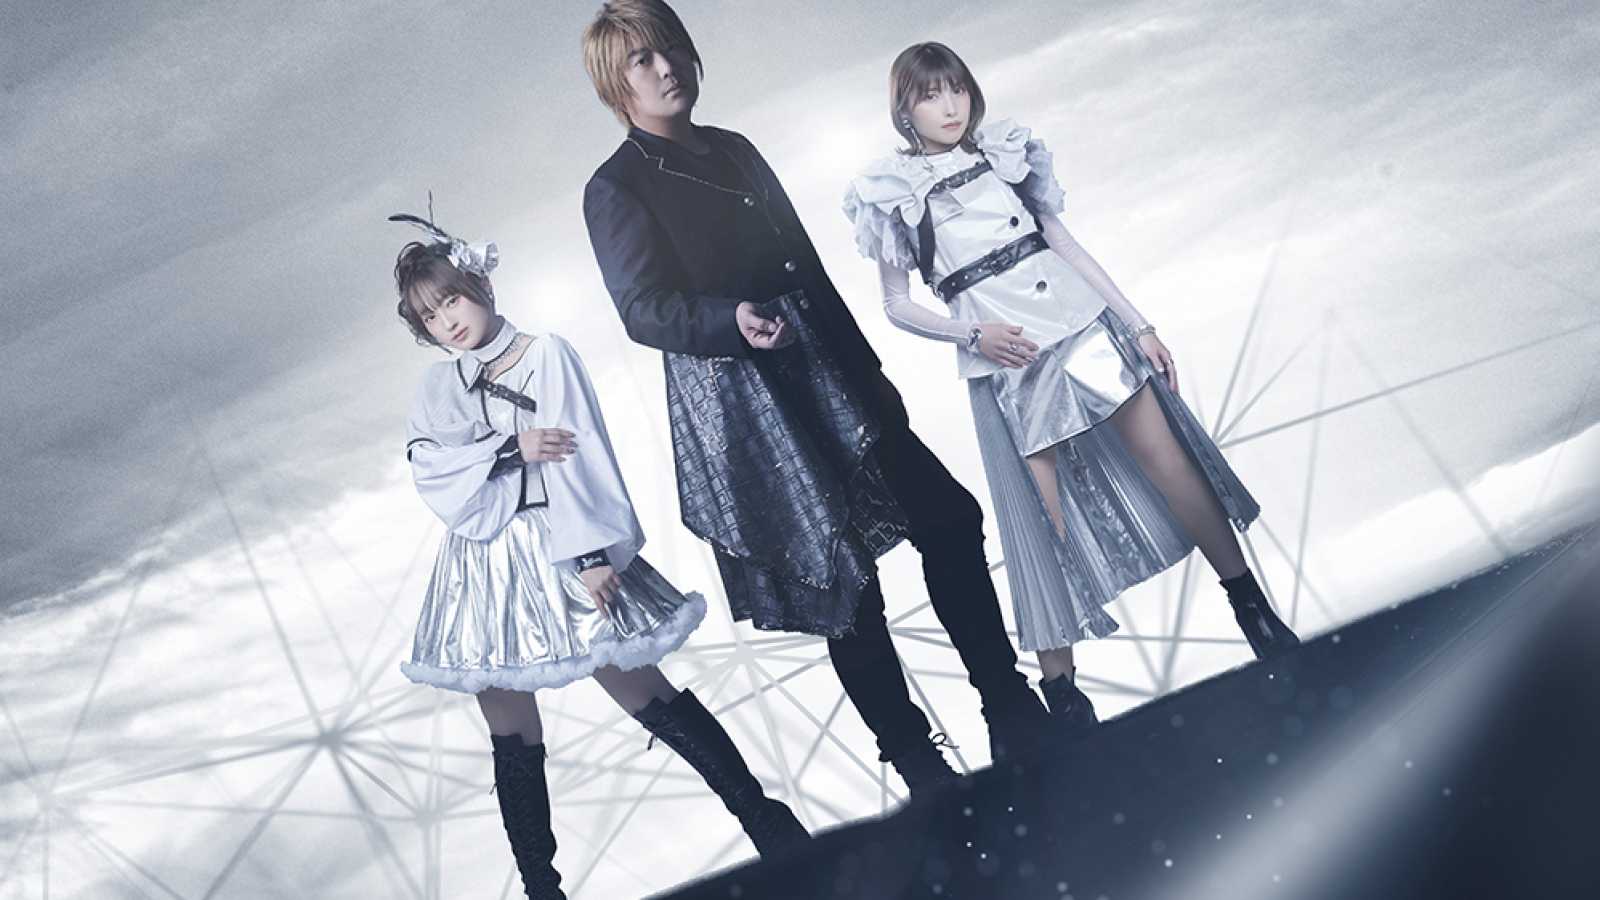 Nowy album fripSide © NBCUniversal Entertainment Japan. All rights reserved.